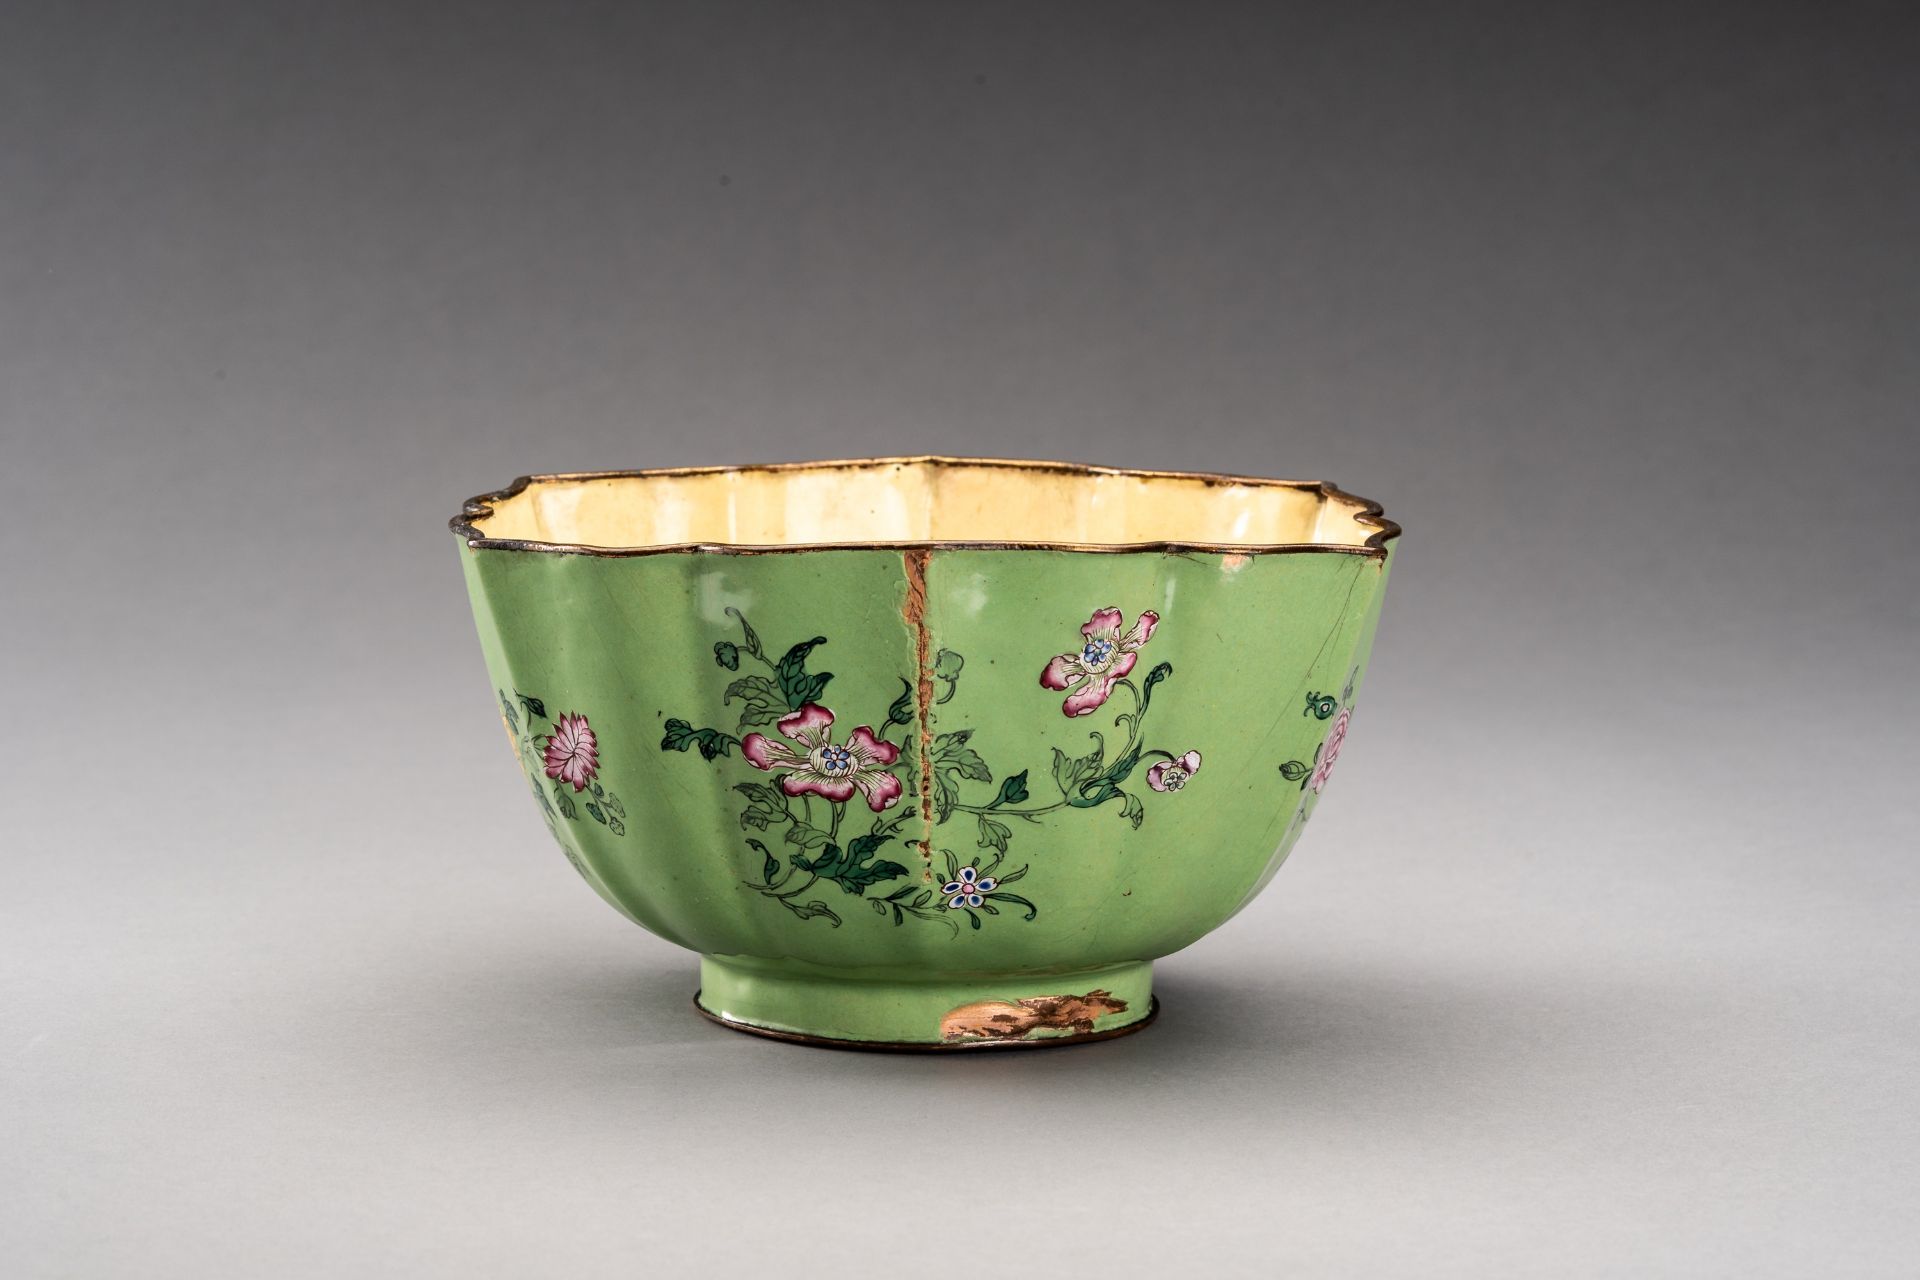 A LARGE LOBED CANTON ENAMEL BOWL, QING - Image 3 of 7